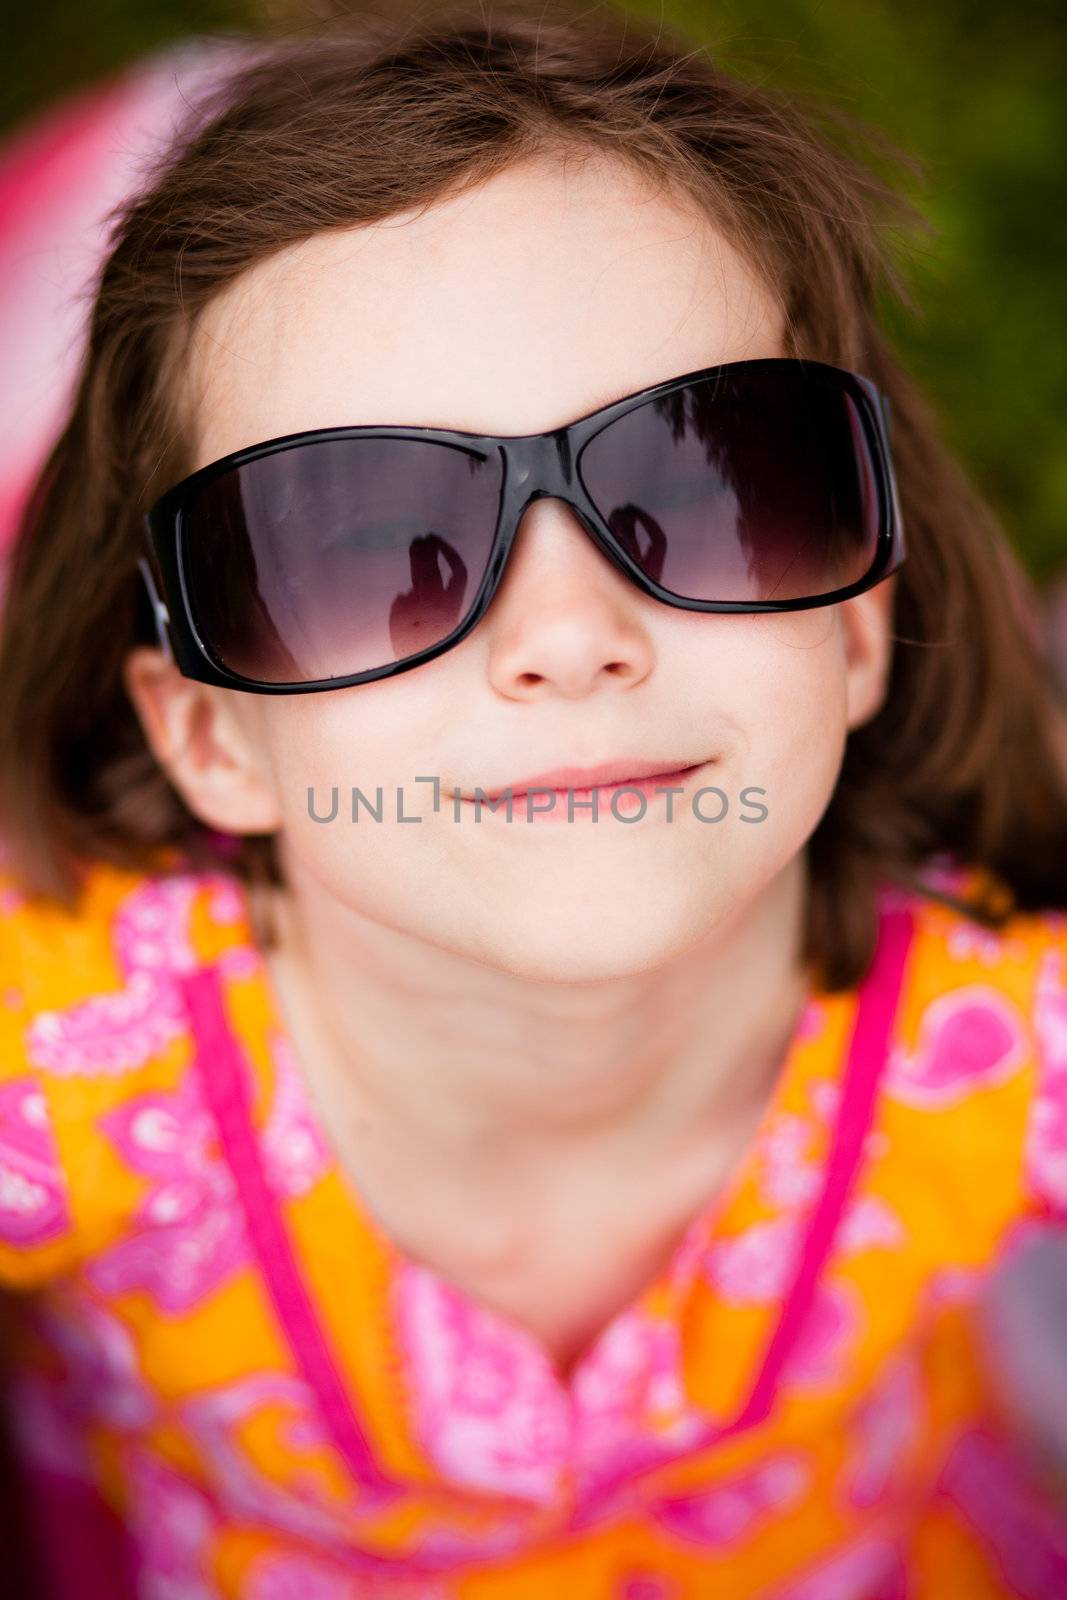 Little girl with sunglasses smiling